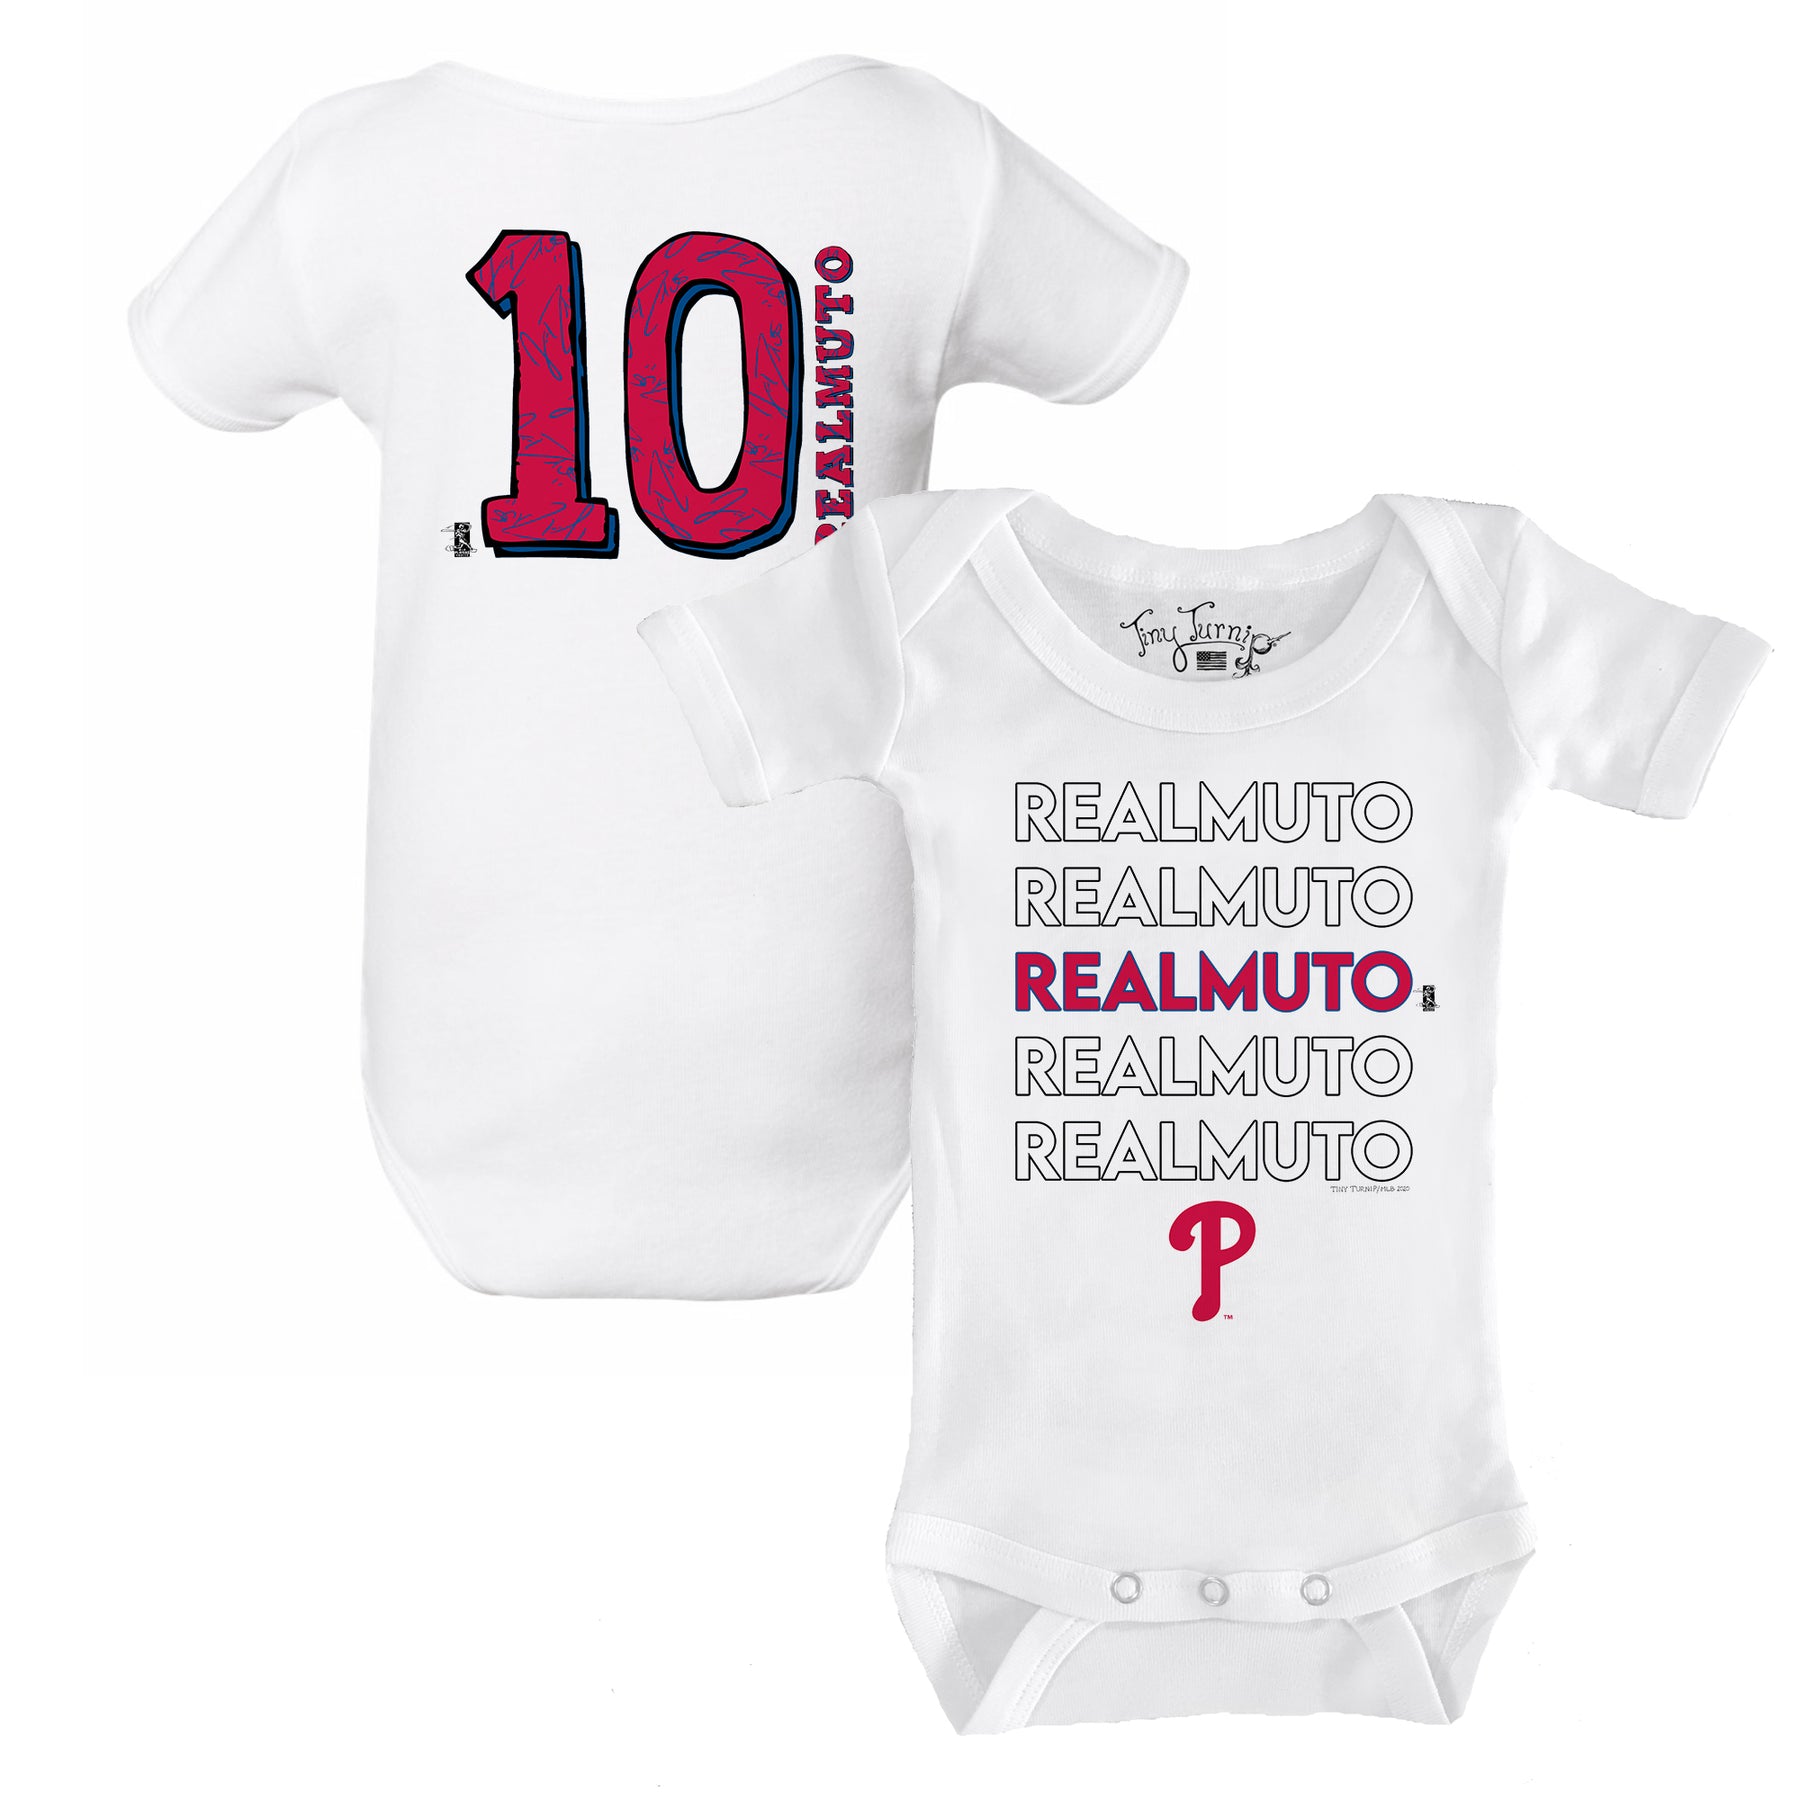 Cutest Phillies Fan Baby Bodysuit, Phillies Baseball Baby Bodysuit, Phillies Game Day Bodysuit, Cutest Phillies Baby Outfit